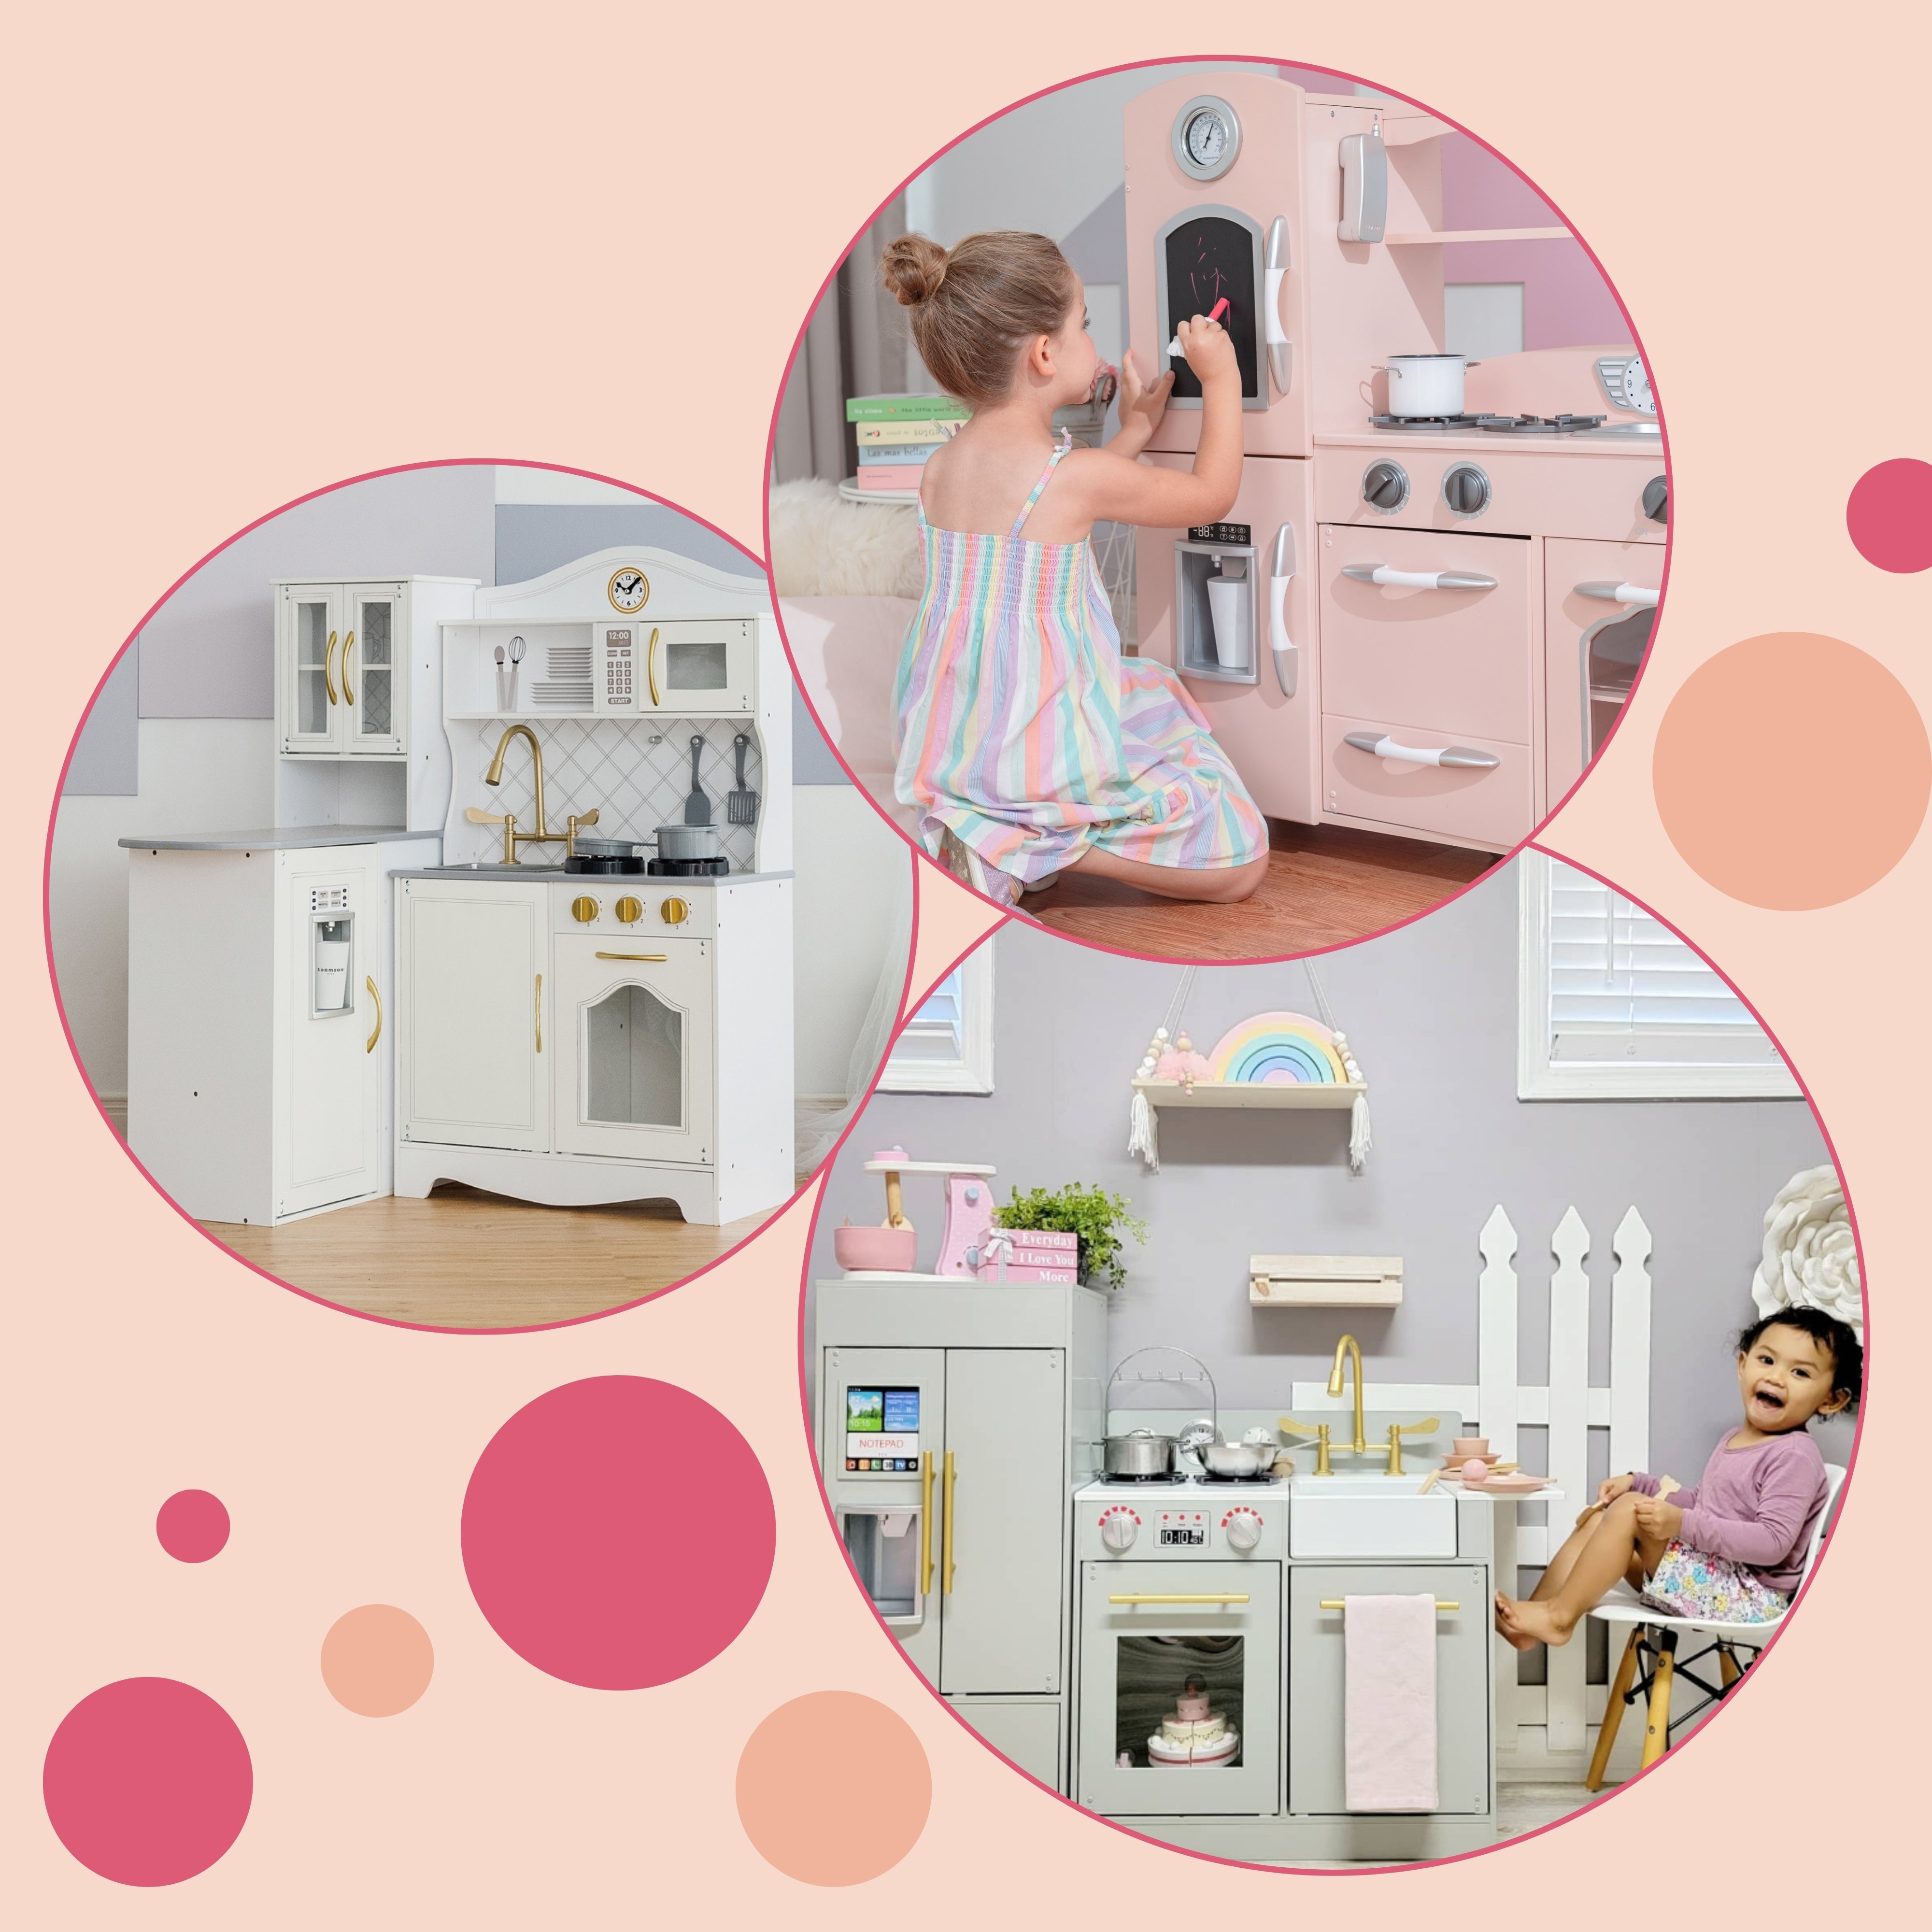 Three circular photos featuring a white and gold play kitchen, a little girl playing with a retro pink play kitchen, and a little girl sitting next to her light gray play kitchen.